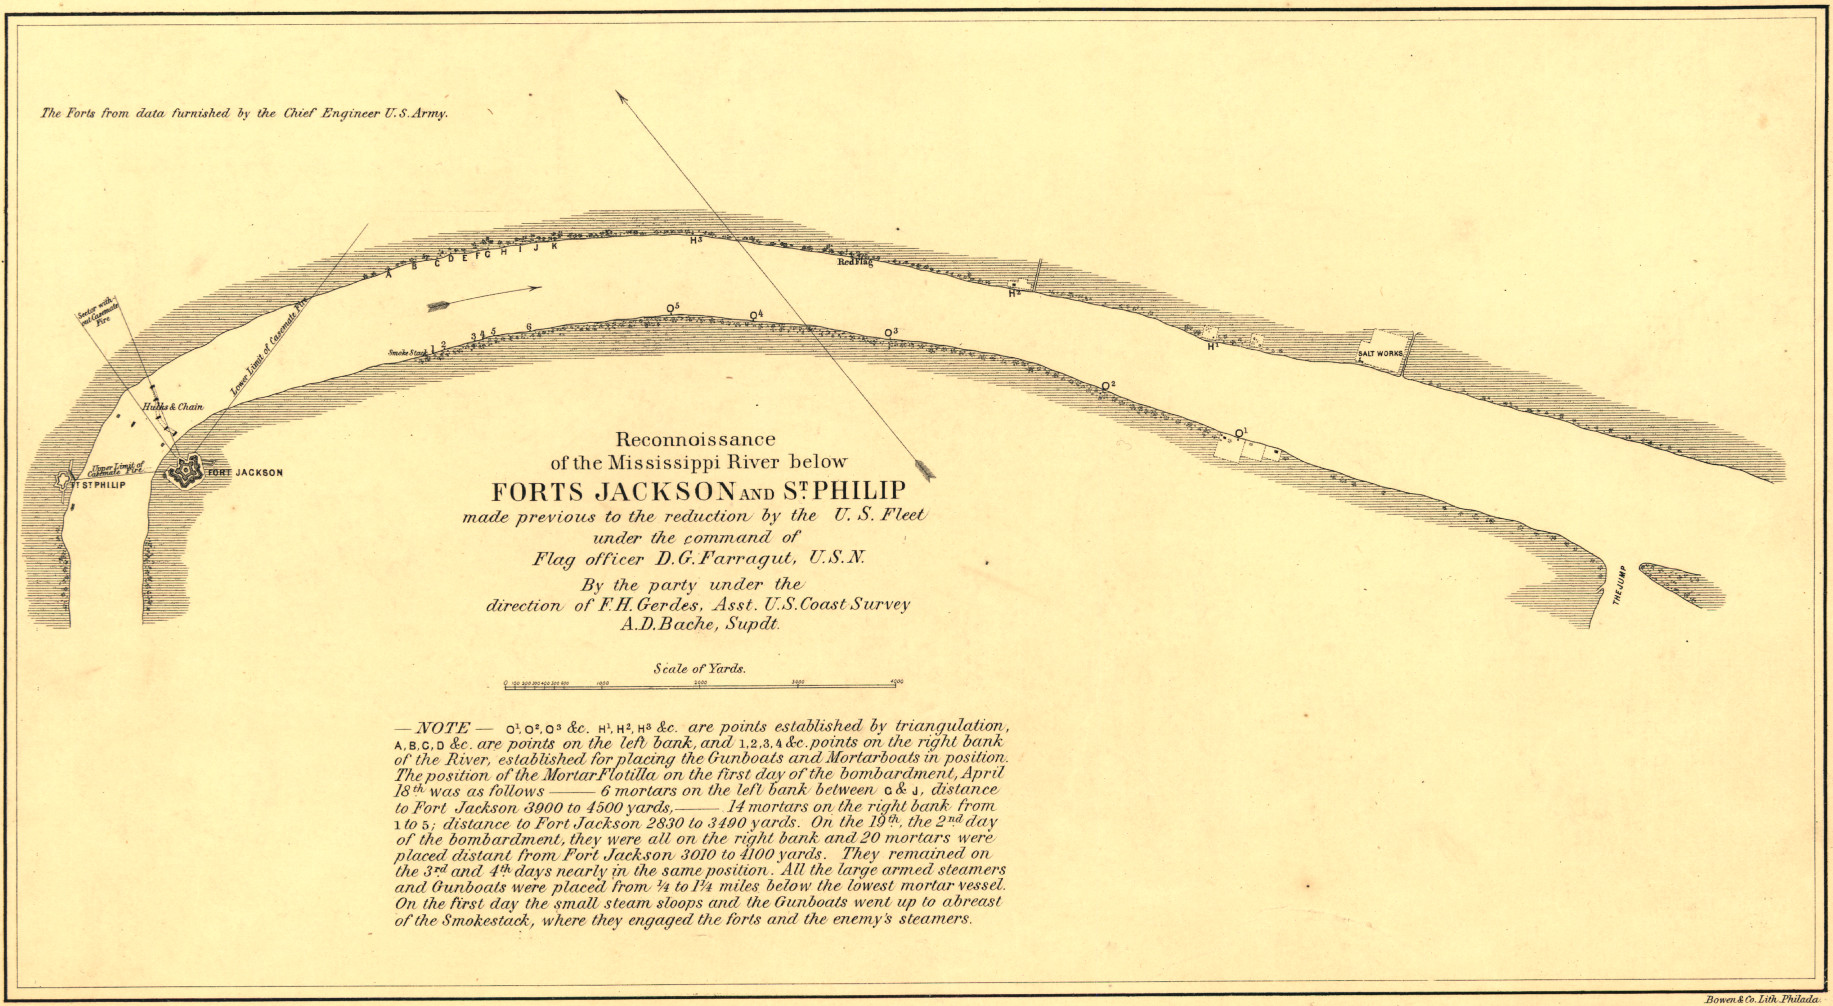 Diagram of river path with reconnaissance notes on riverbank to south of Forts Jackson and St. Philip.